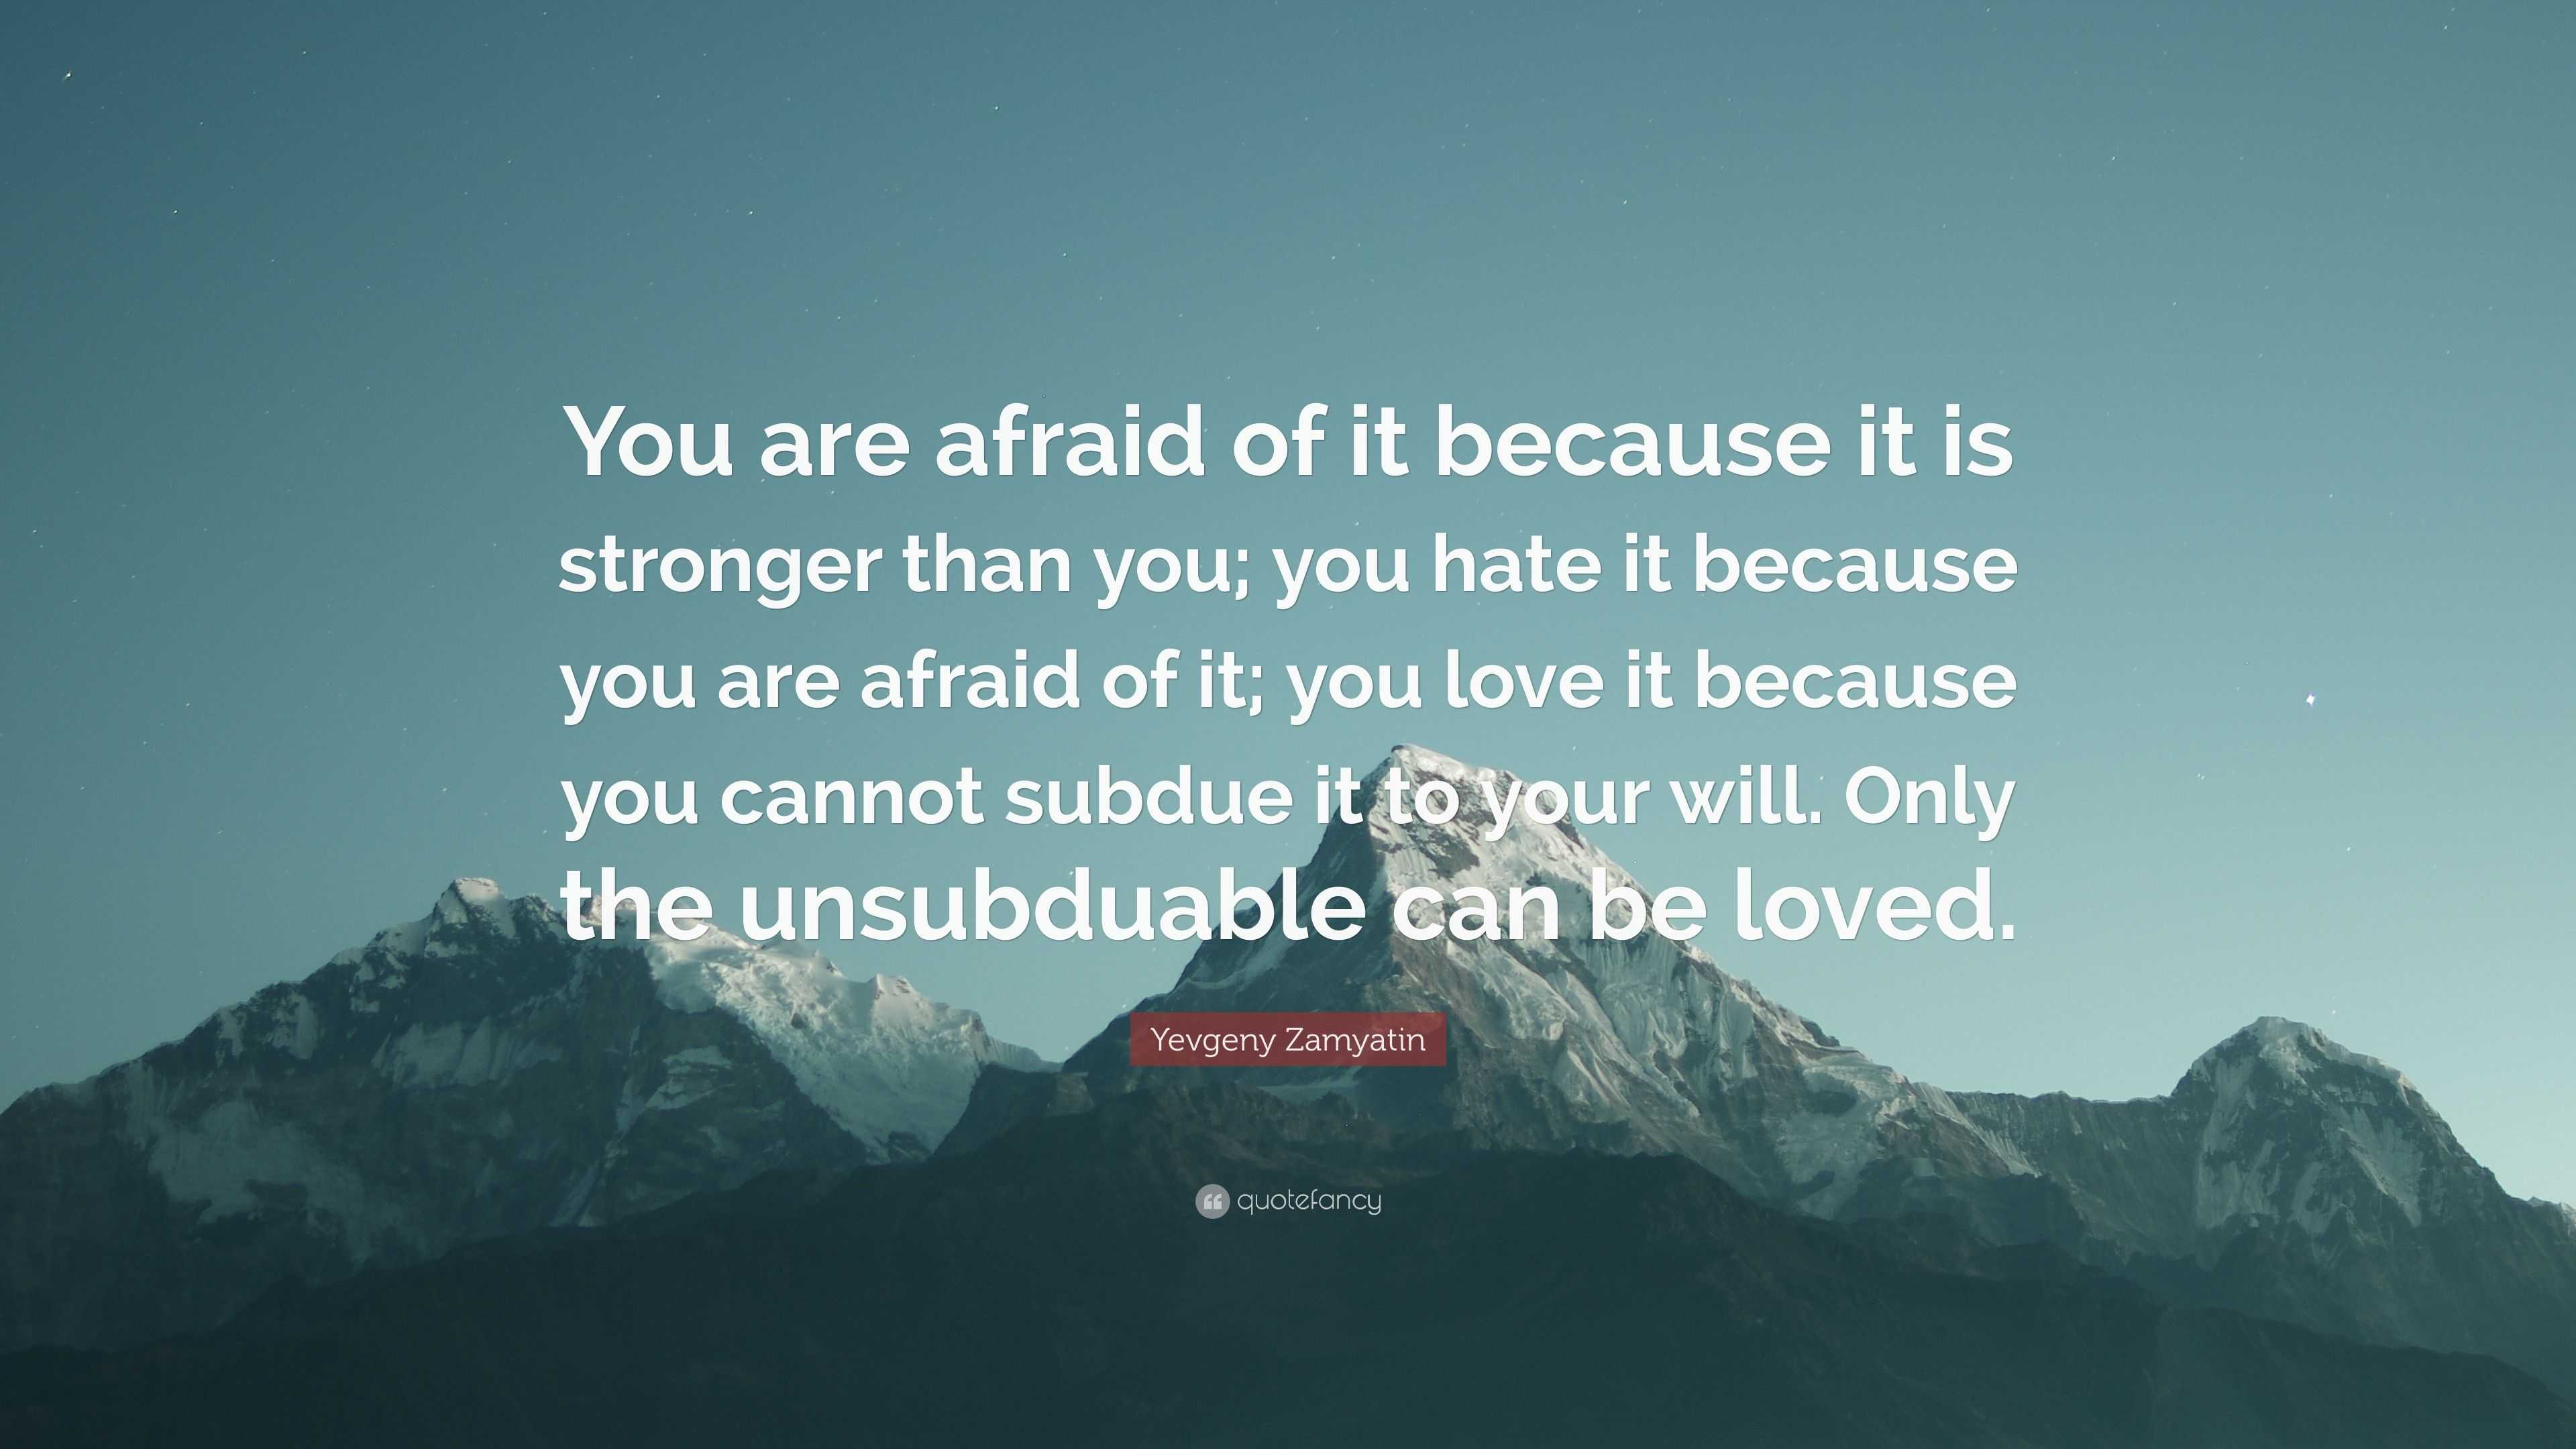 Yevgeny Zamyatin Quote “You are afraid of it because it is stronger than you